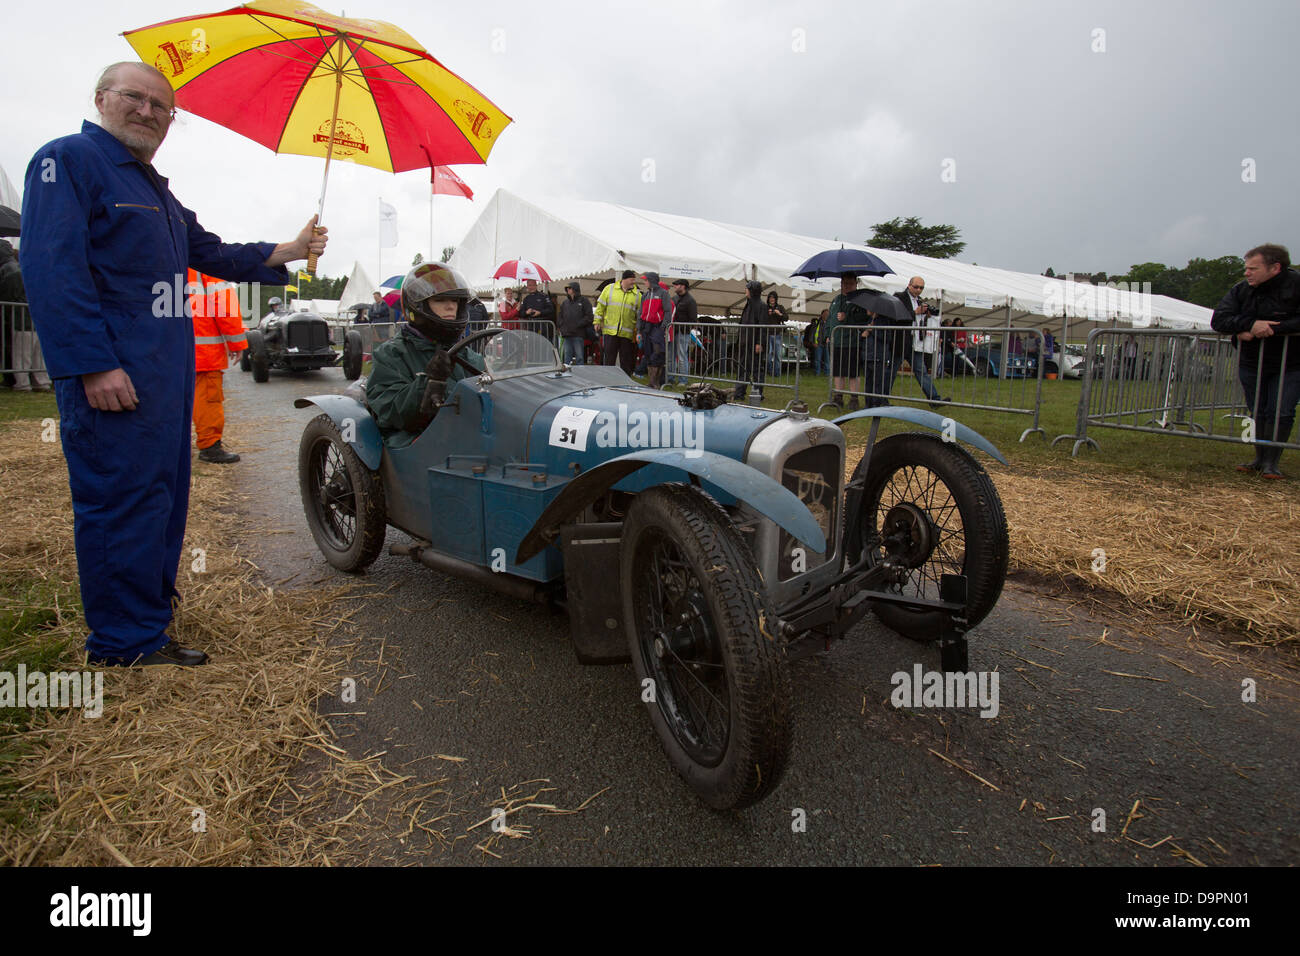 Cholmondeley Pageant of Power, is an annual air, land and water demonstration of power and speed. Stock Photo